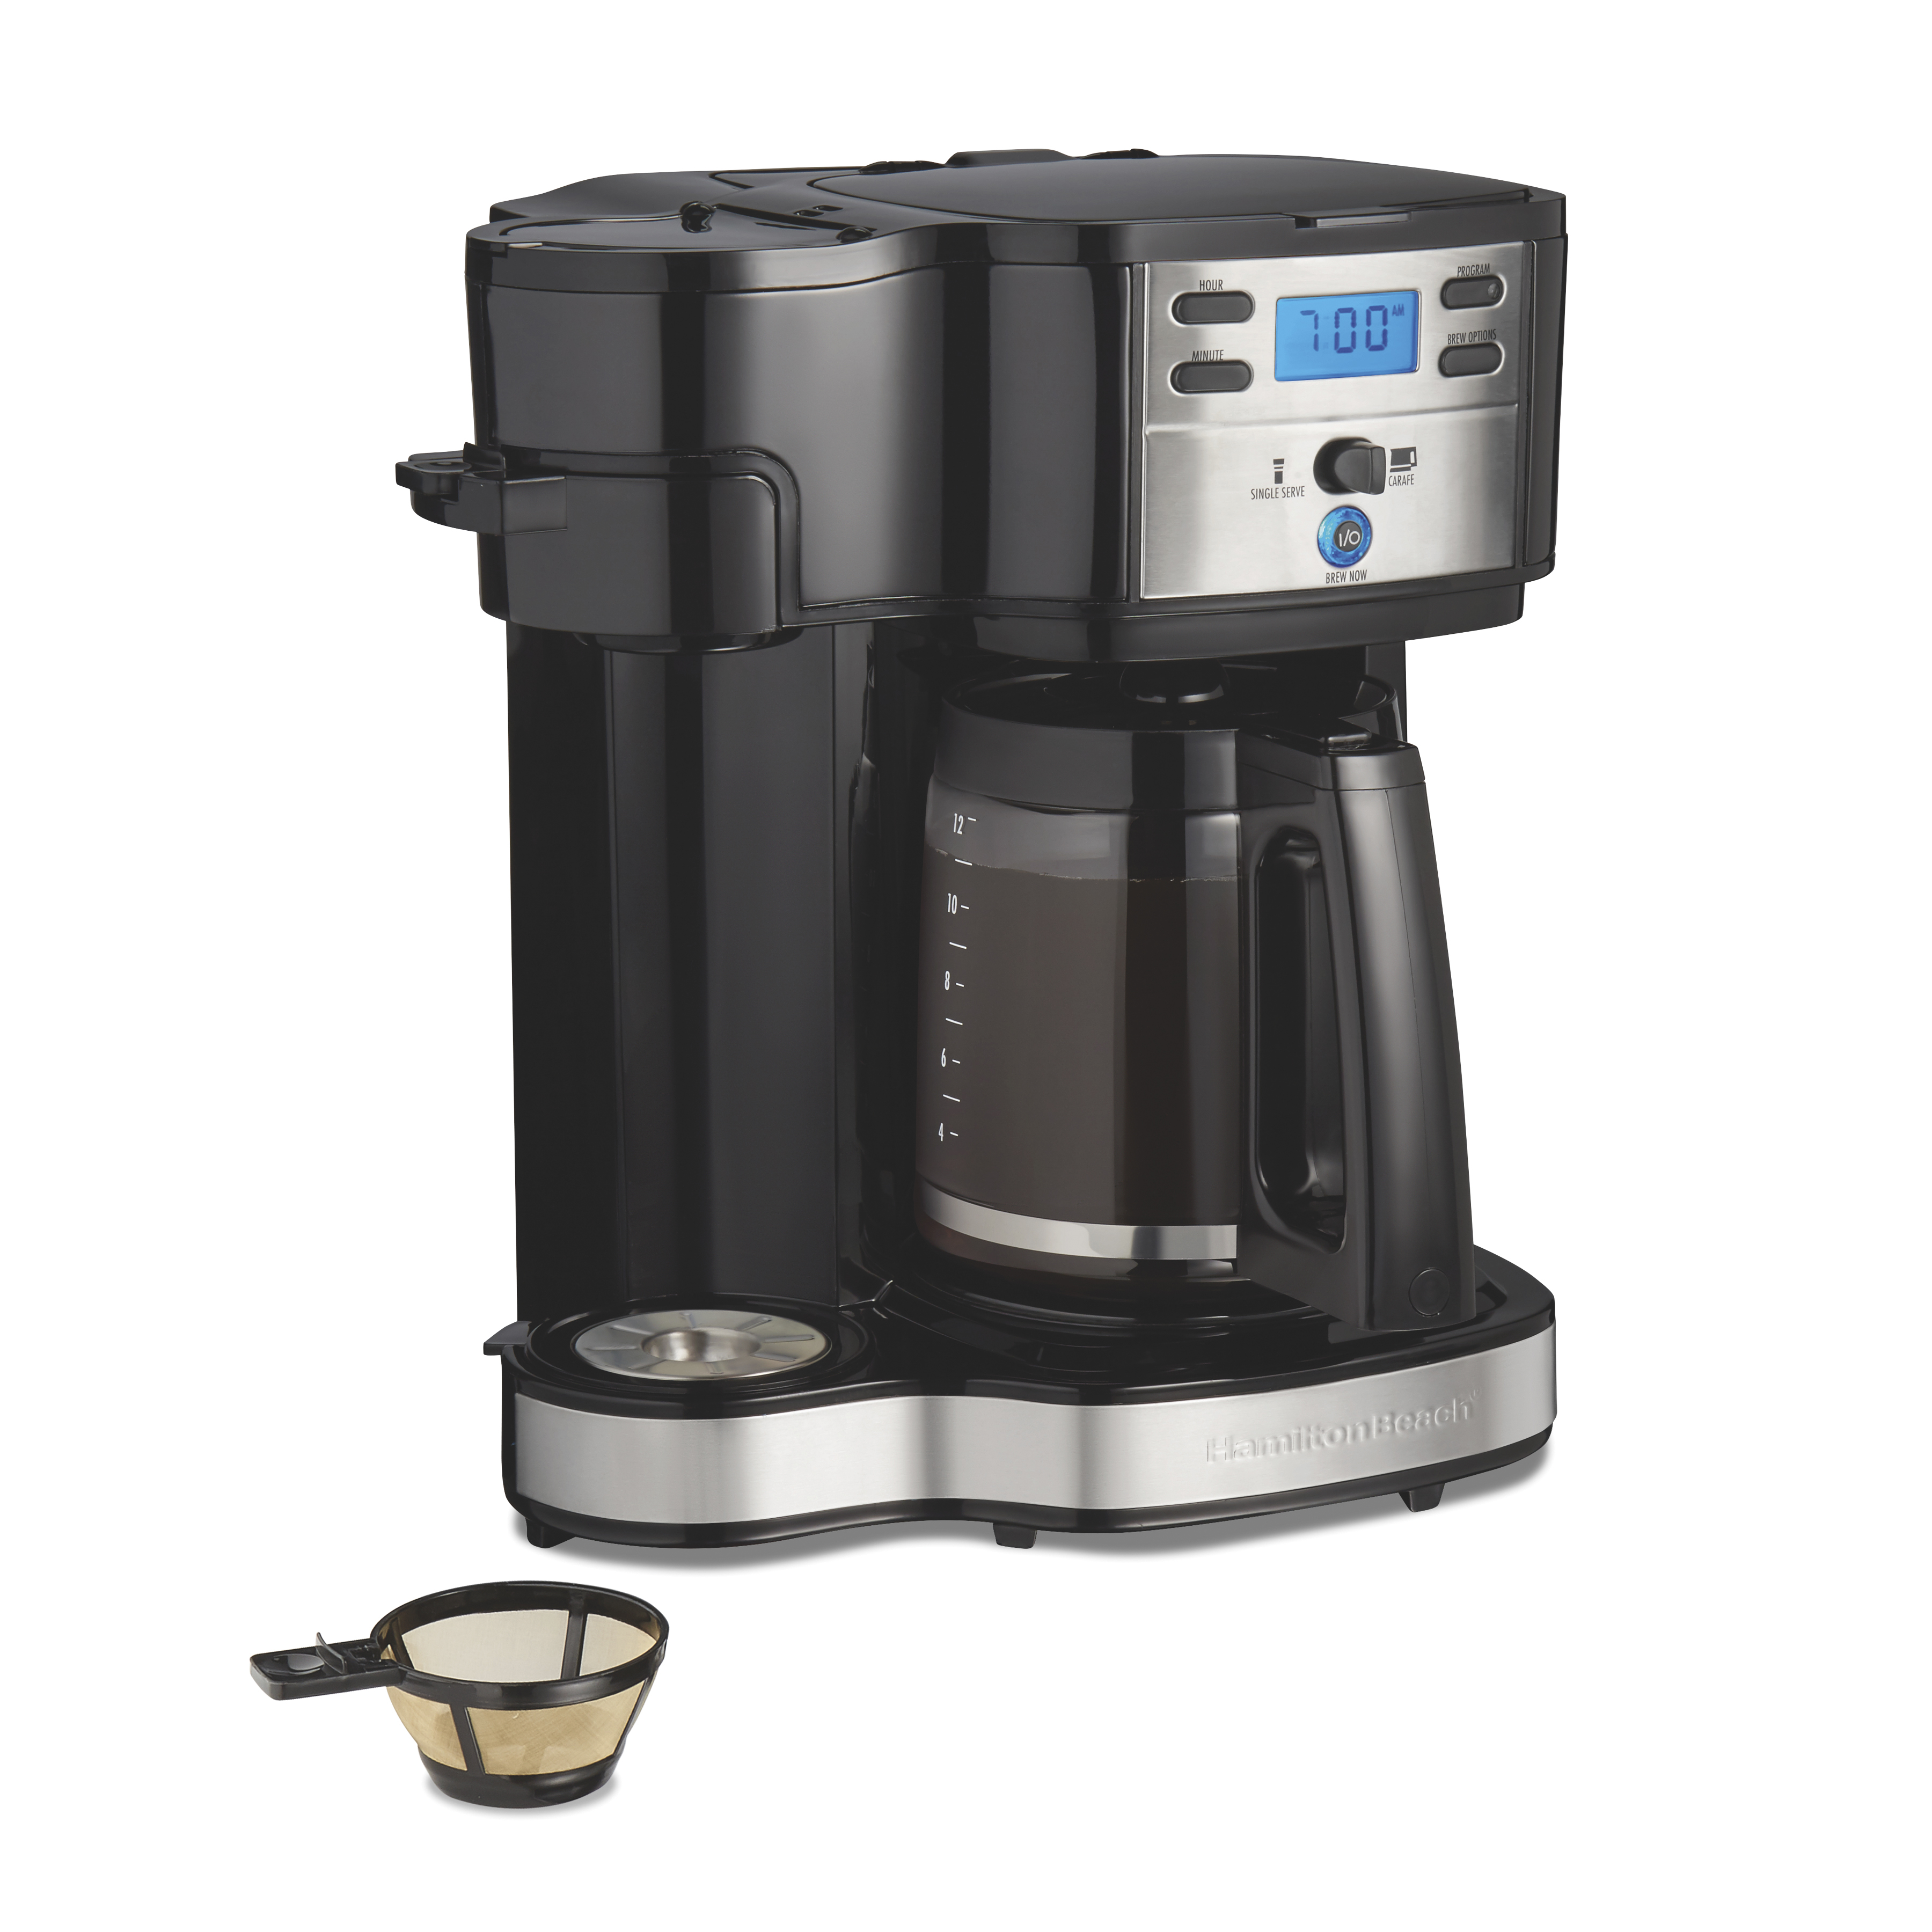 Hamilton Beach 2-Way Programmable Coffee Maker, Single-Serve and 12-Cup Pot, Glass Carafe, Stainless Steel, New, 47650 - image 1 of 9